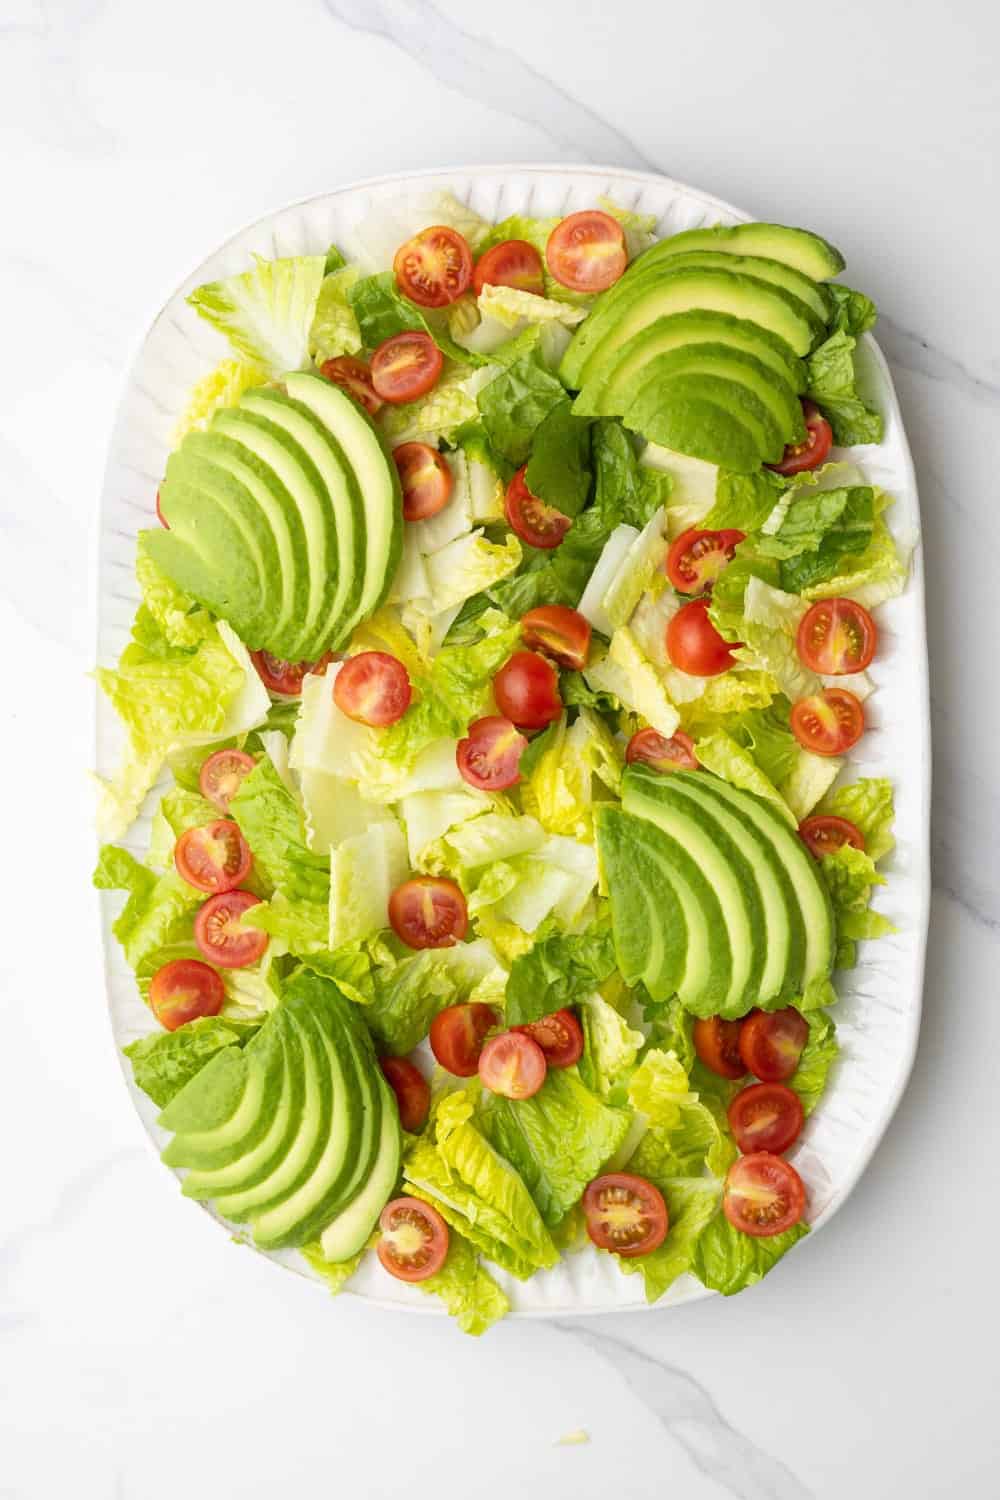 A platter of romaine lettuce, halved cherry tomatoes, and sliced avocado